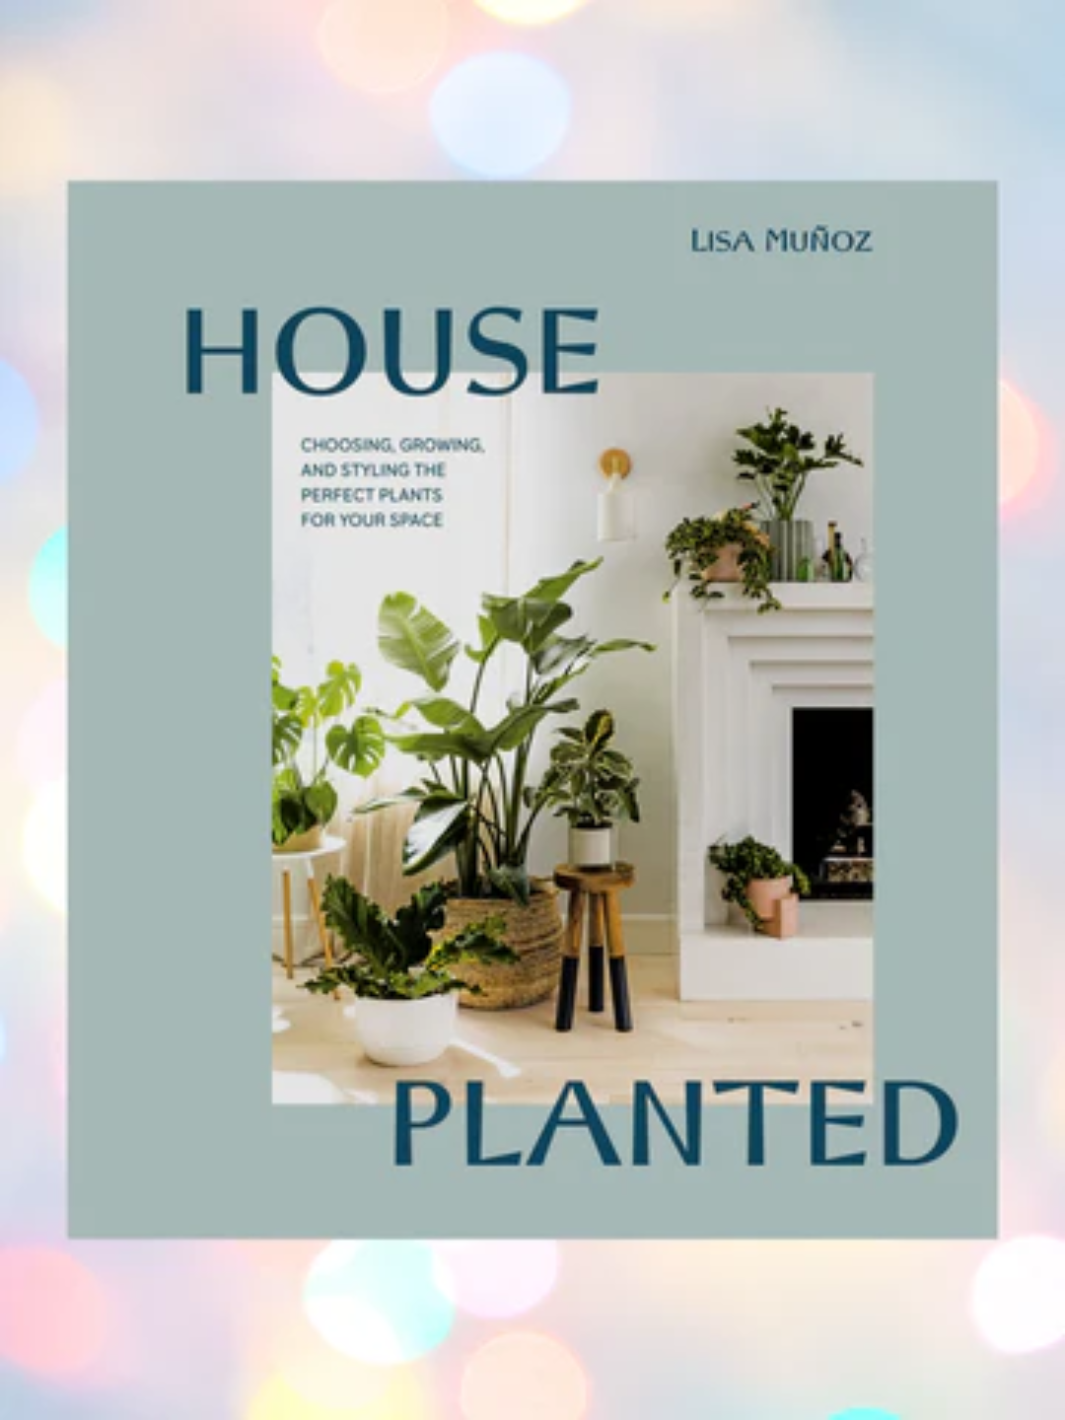 House planted book